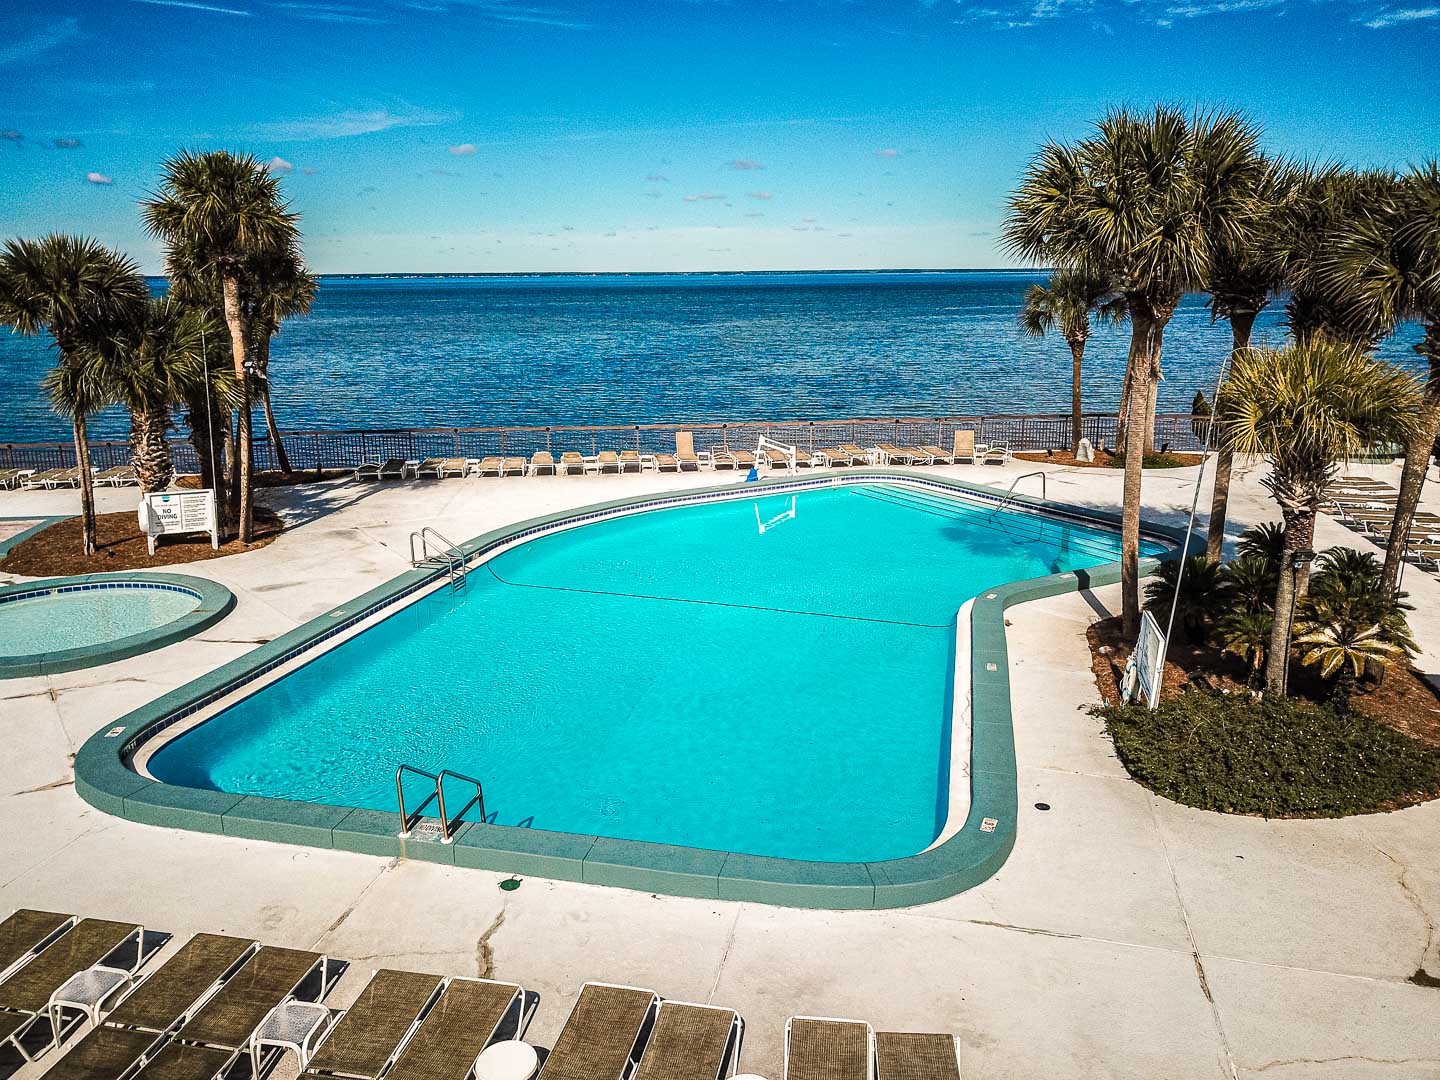 A spacious outdoor swimming pool with a beach view at VRI's Bay Club of Sandestin in Florida.